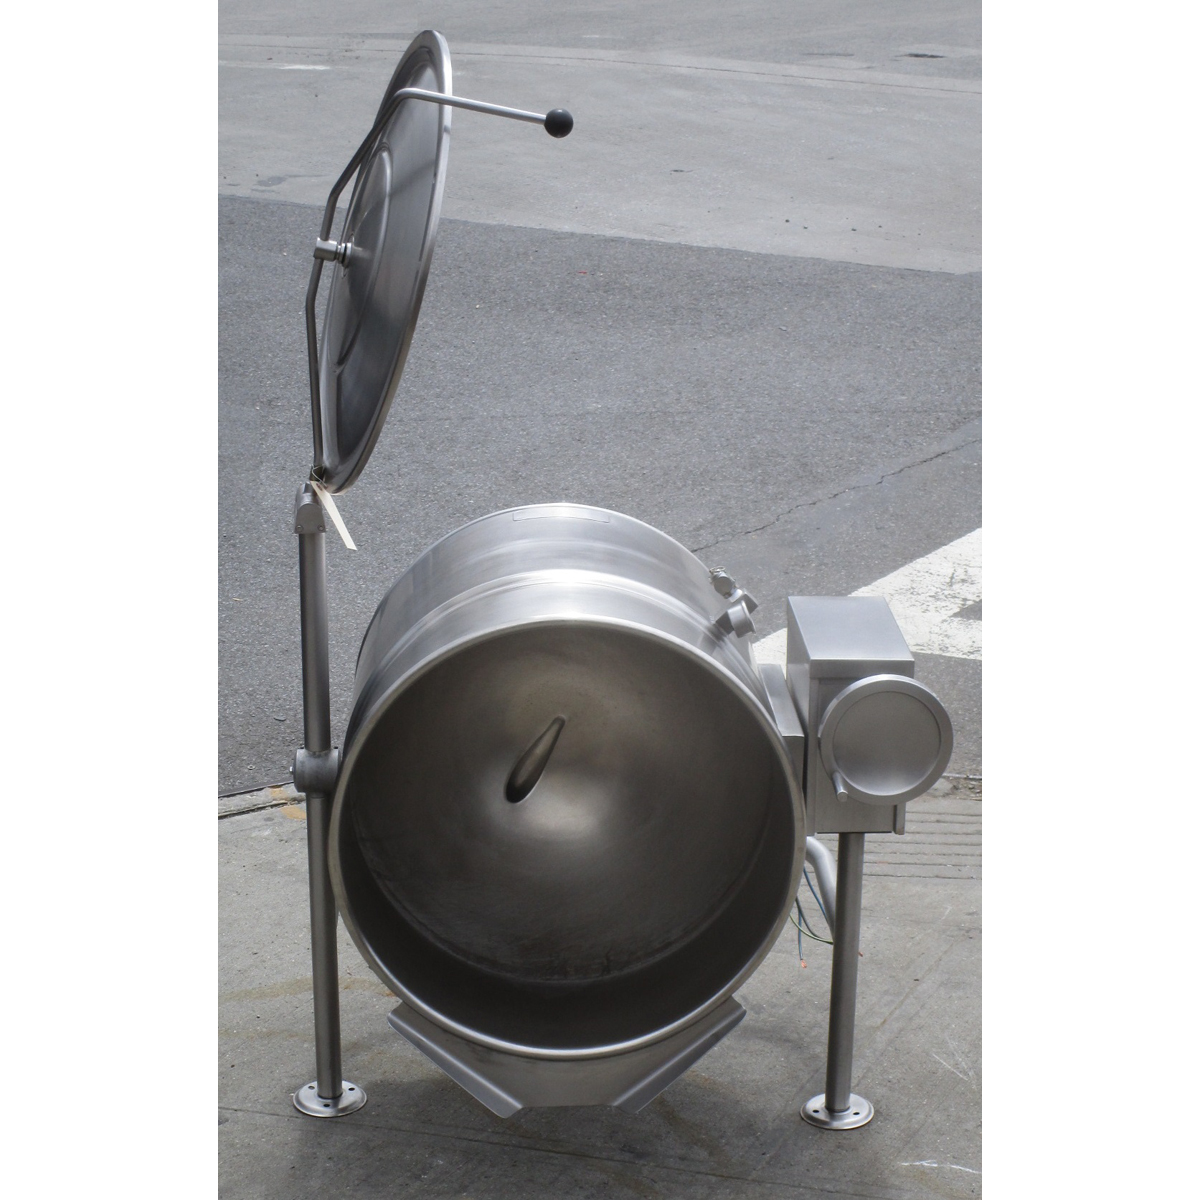 Cleveland KEL40T 40 Gallon Electric Tilting Kettle, Used Great Condition image 4